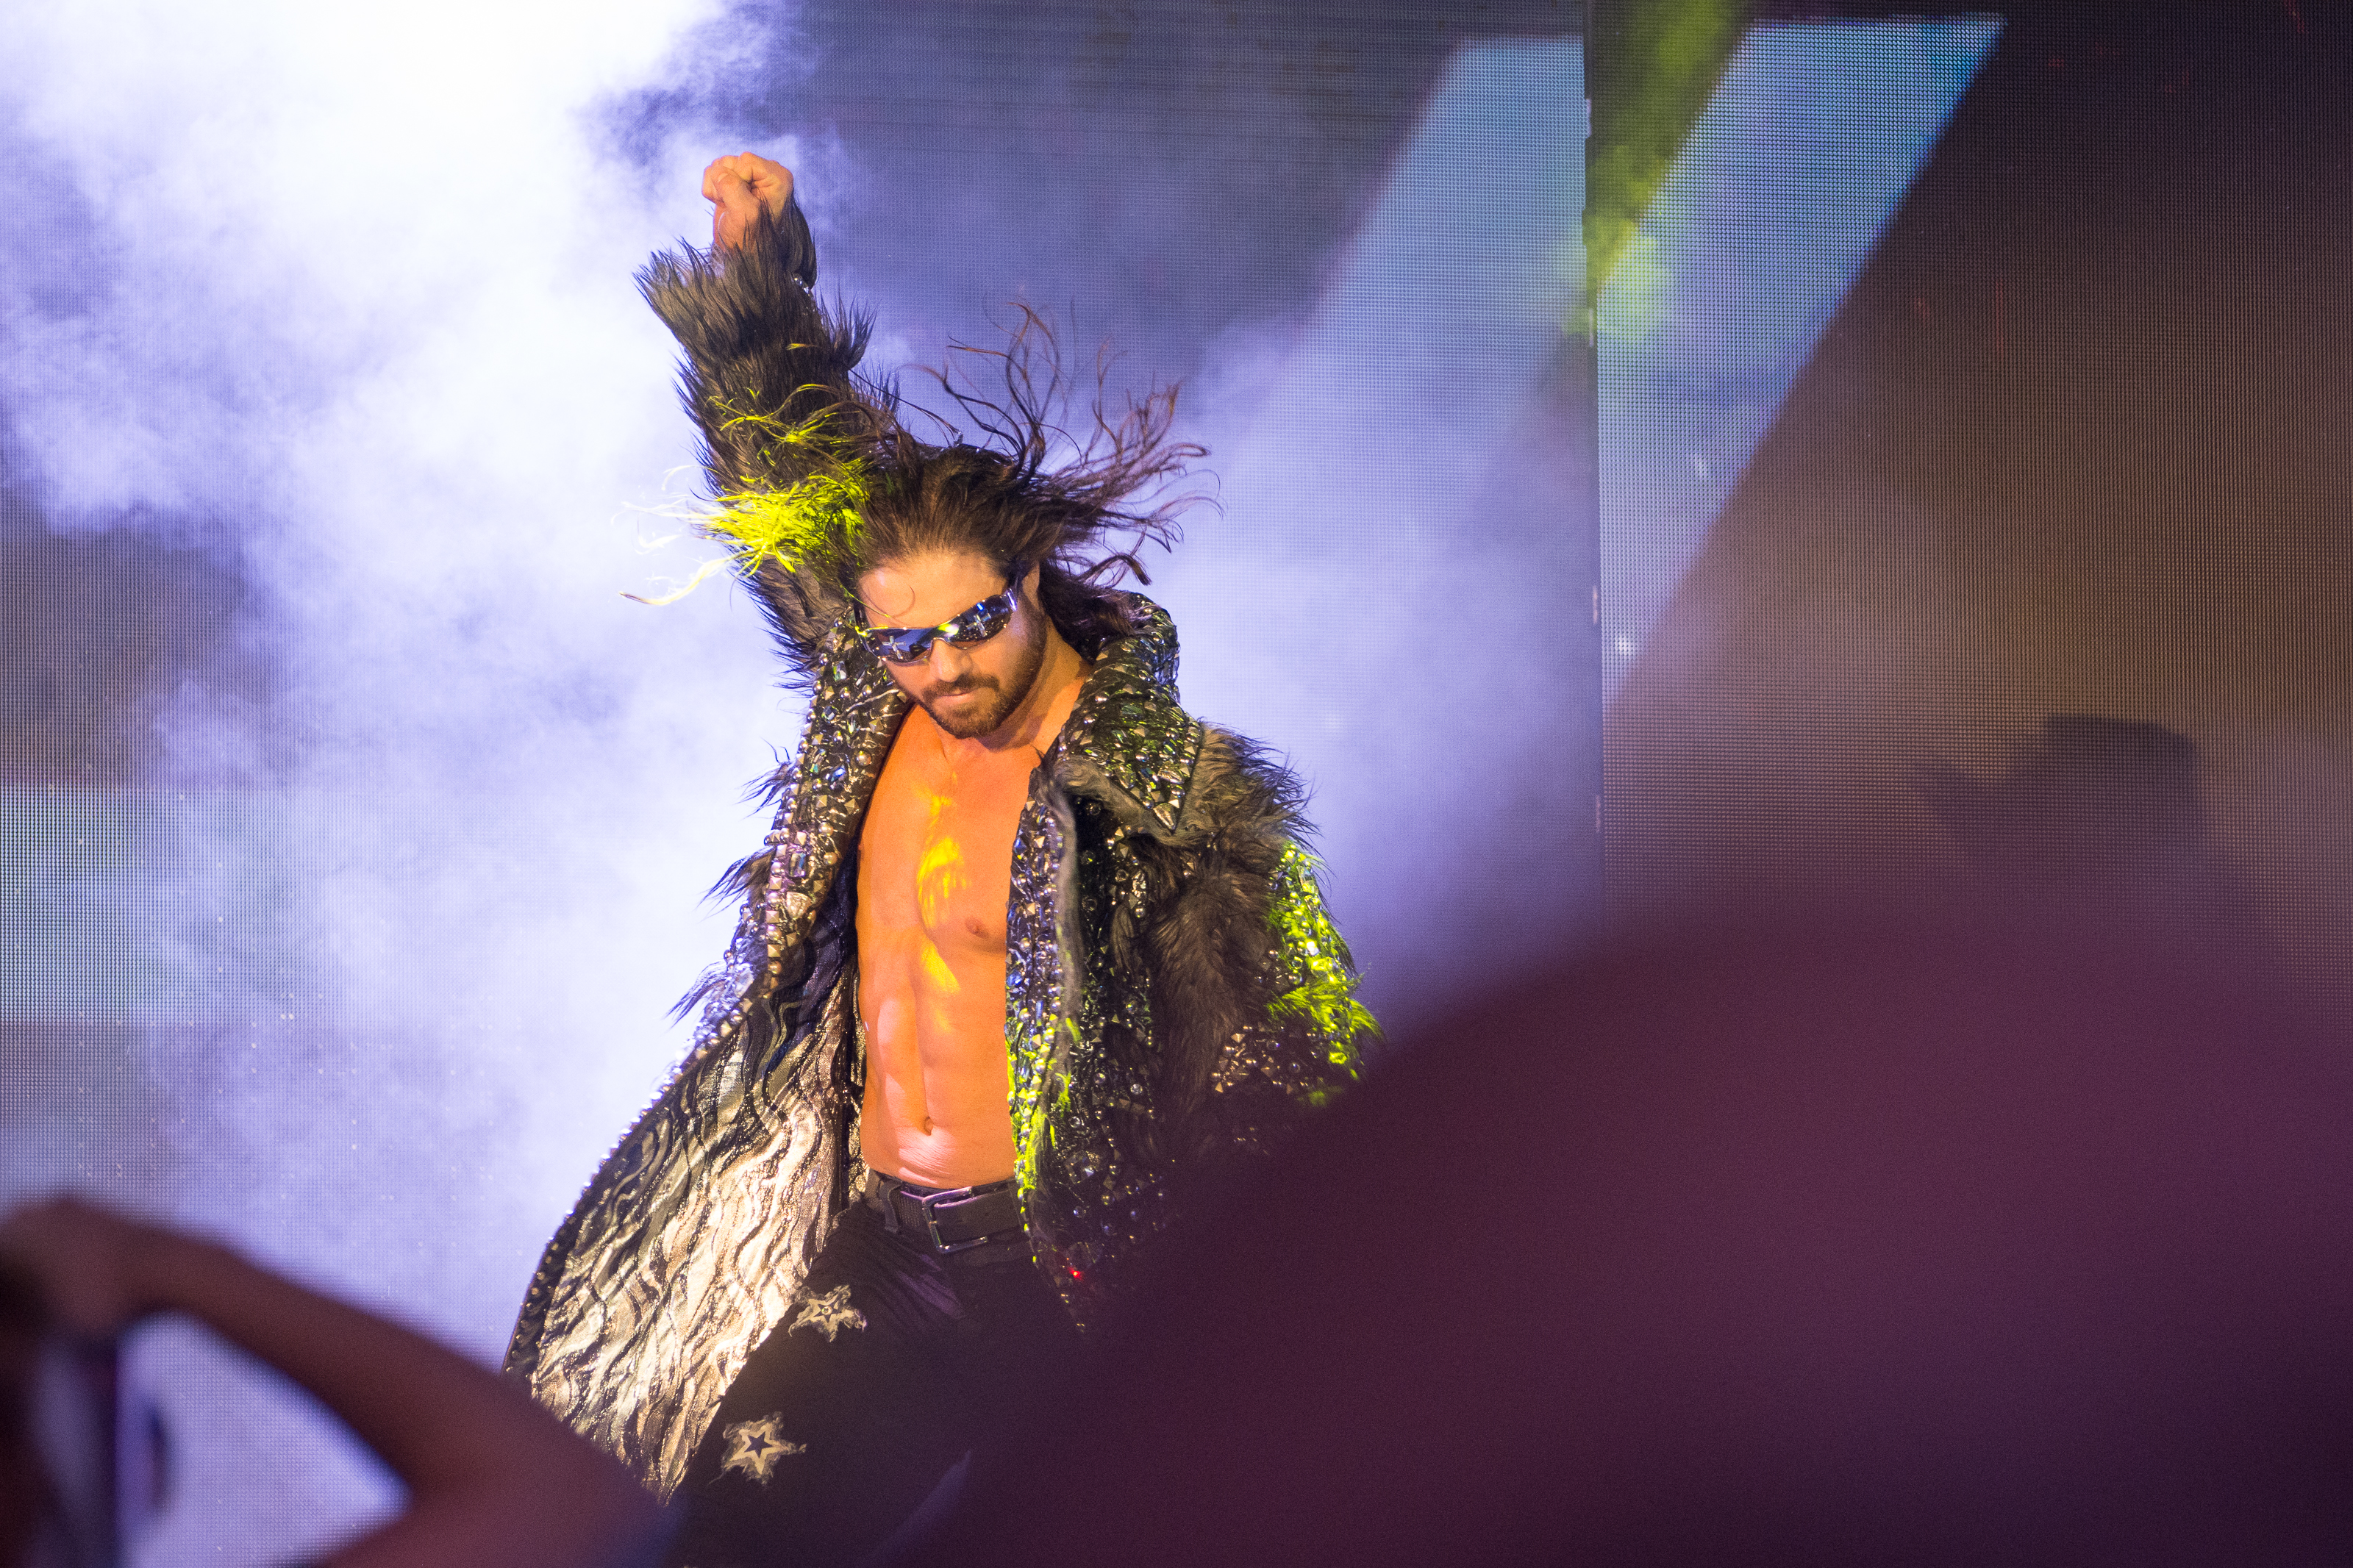 John Morrison Interested In WWE Return?; Will Charlotte Add Another Championship To Her Collection At Summerslam?